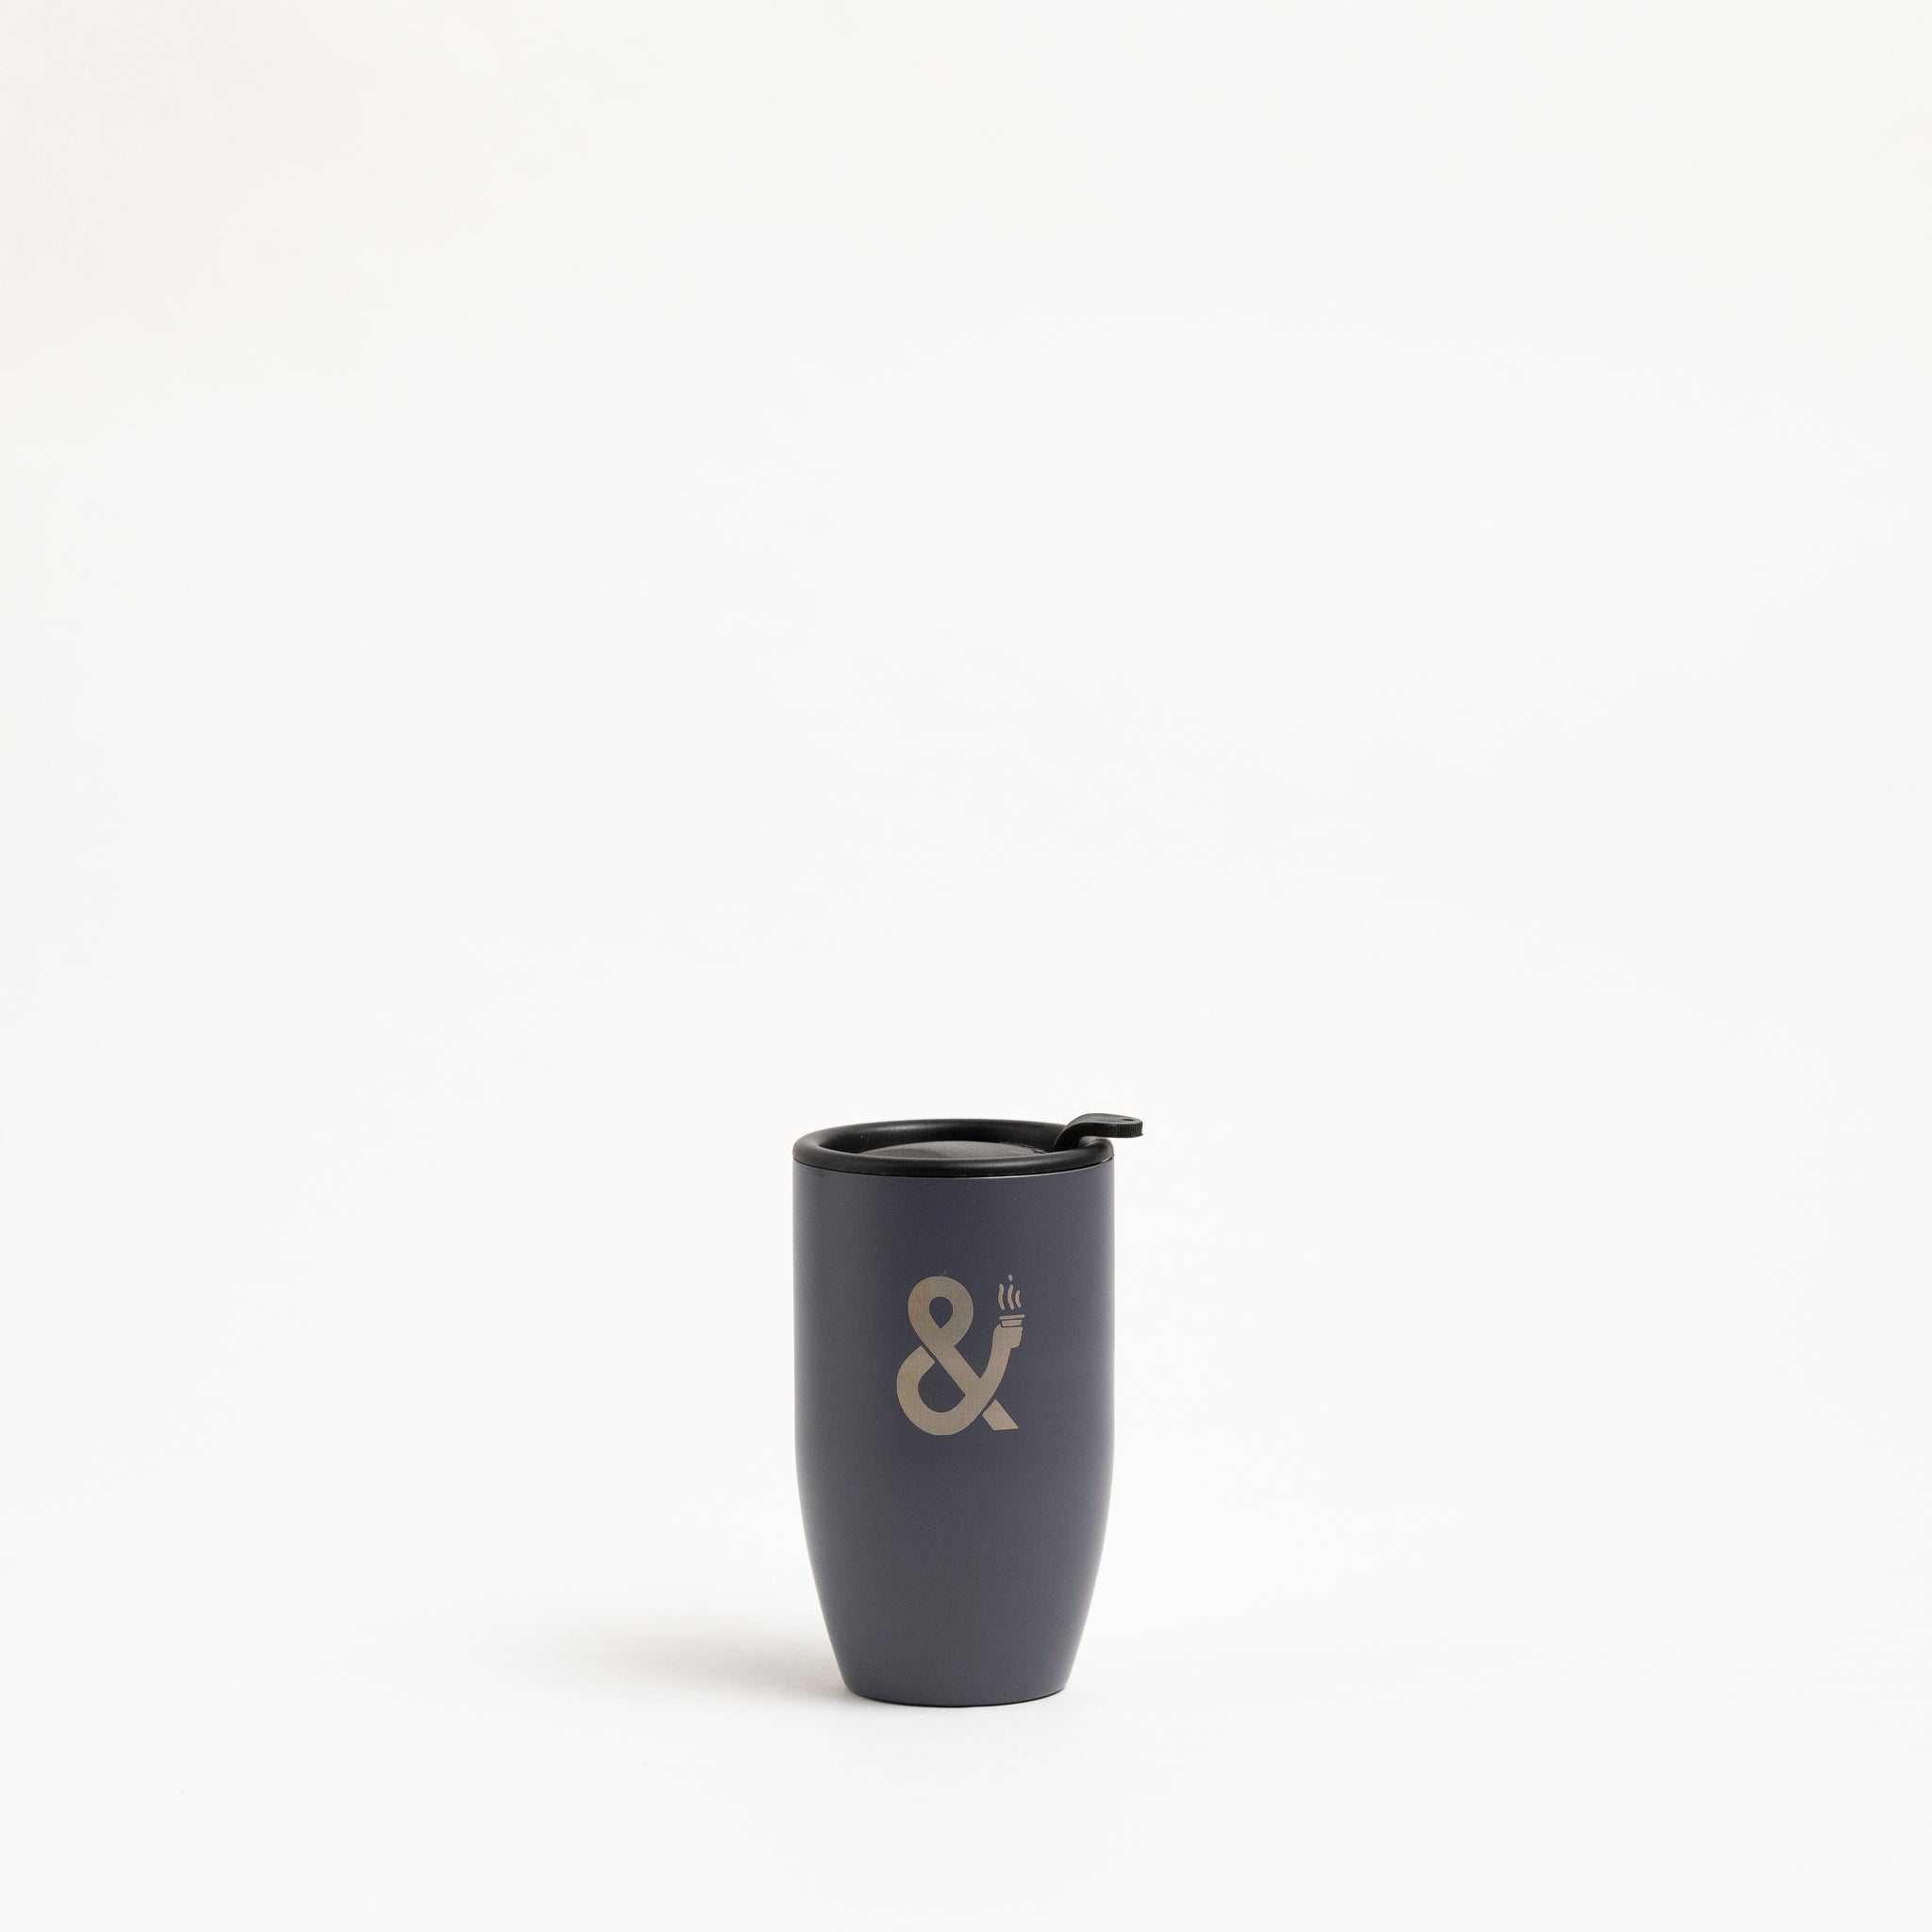 'The Traveller' Thermos Cup 8oz - Will & Co Coffee